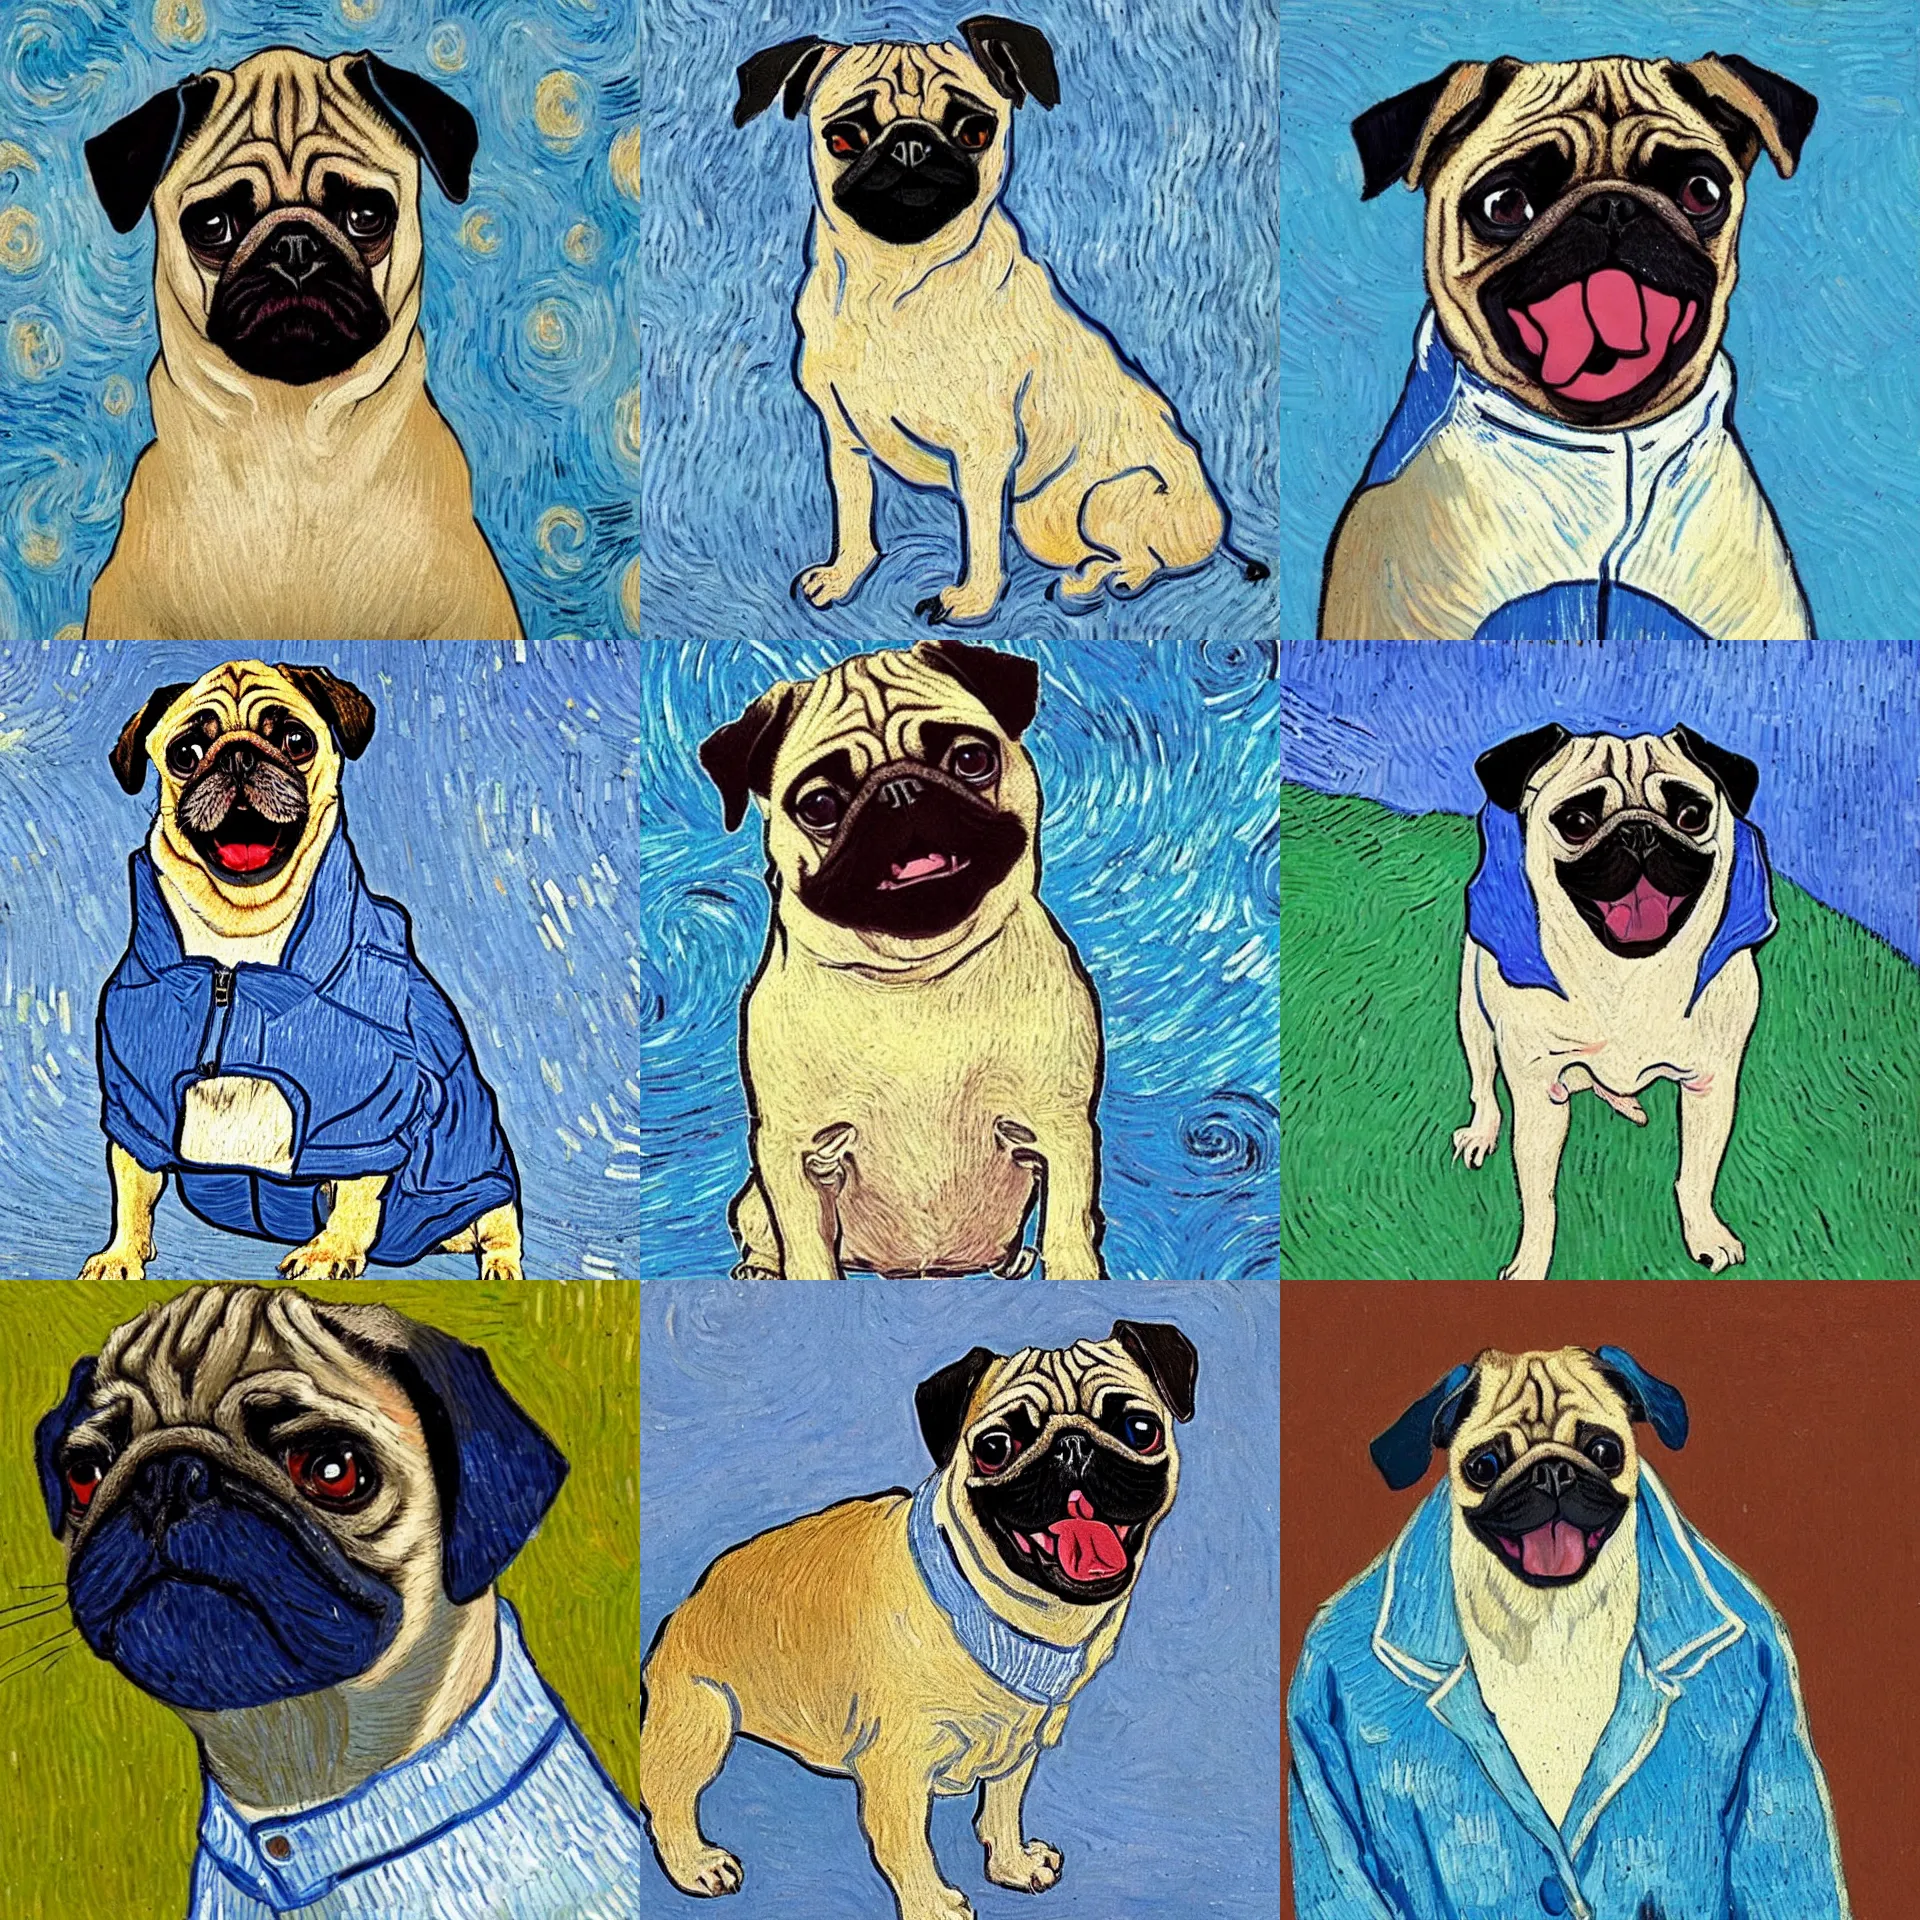 Prompt: a standing confused pug sticking his tongue out, wearing a blue jacket and white shirt as a Van Gogh painting